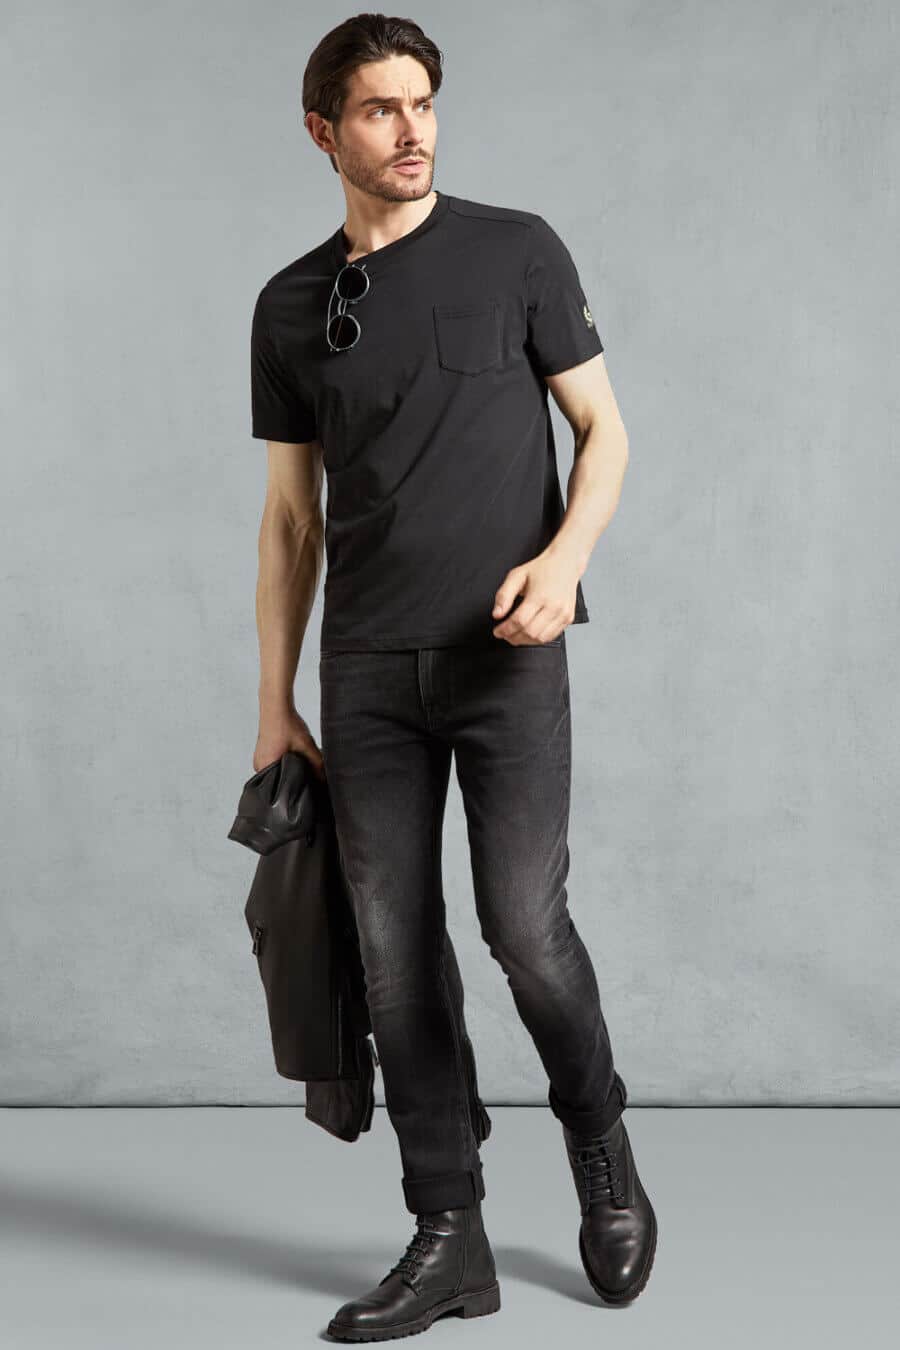 Men's simple all black outfit with t-shirt, jeans, boots and leather jacket